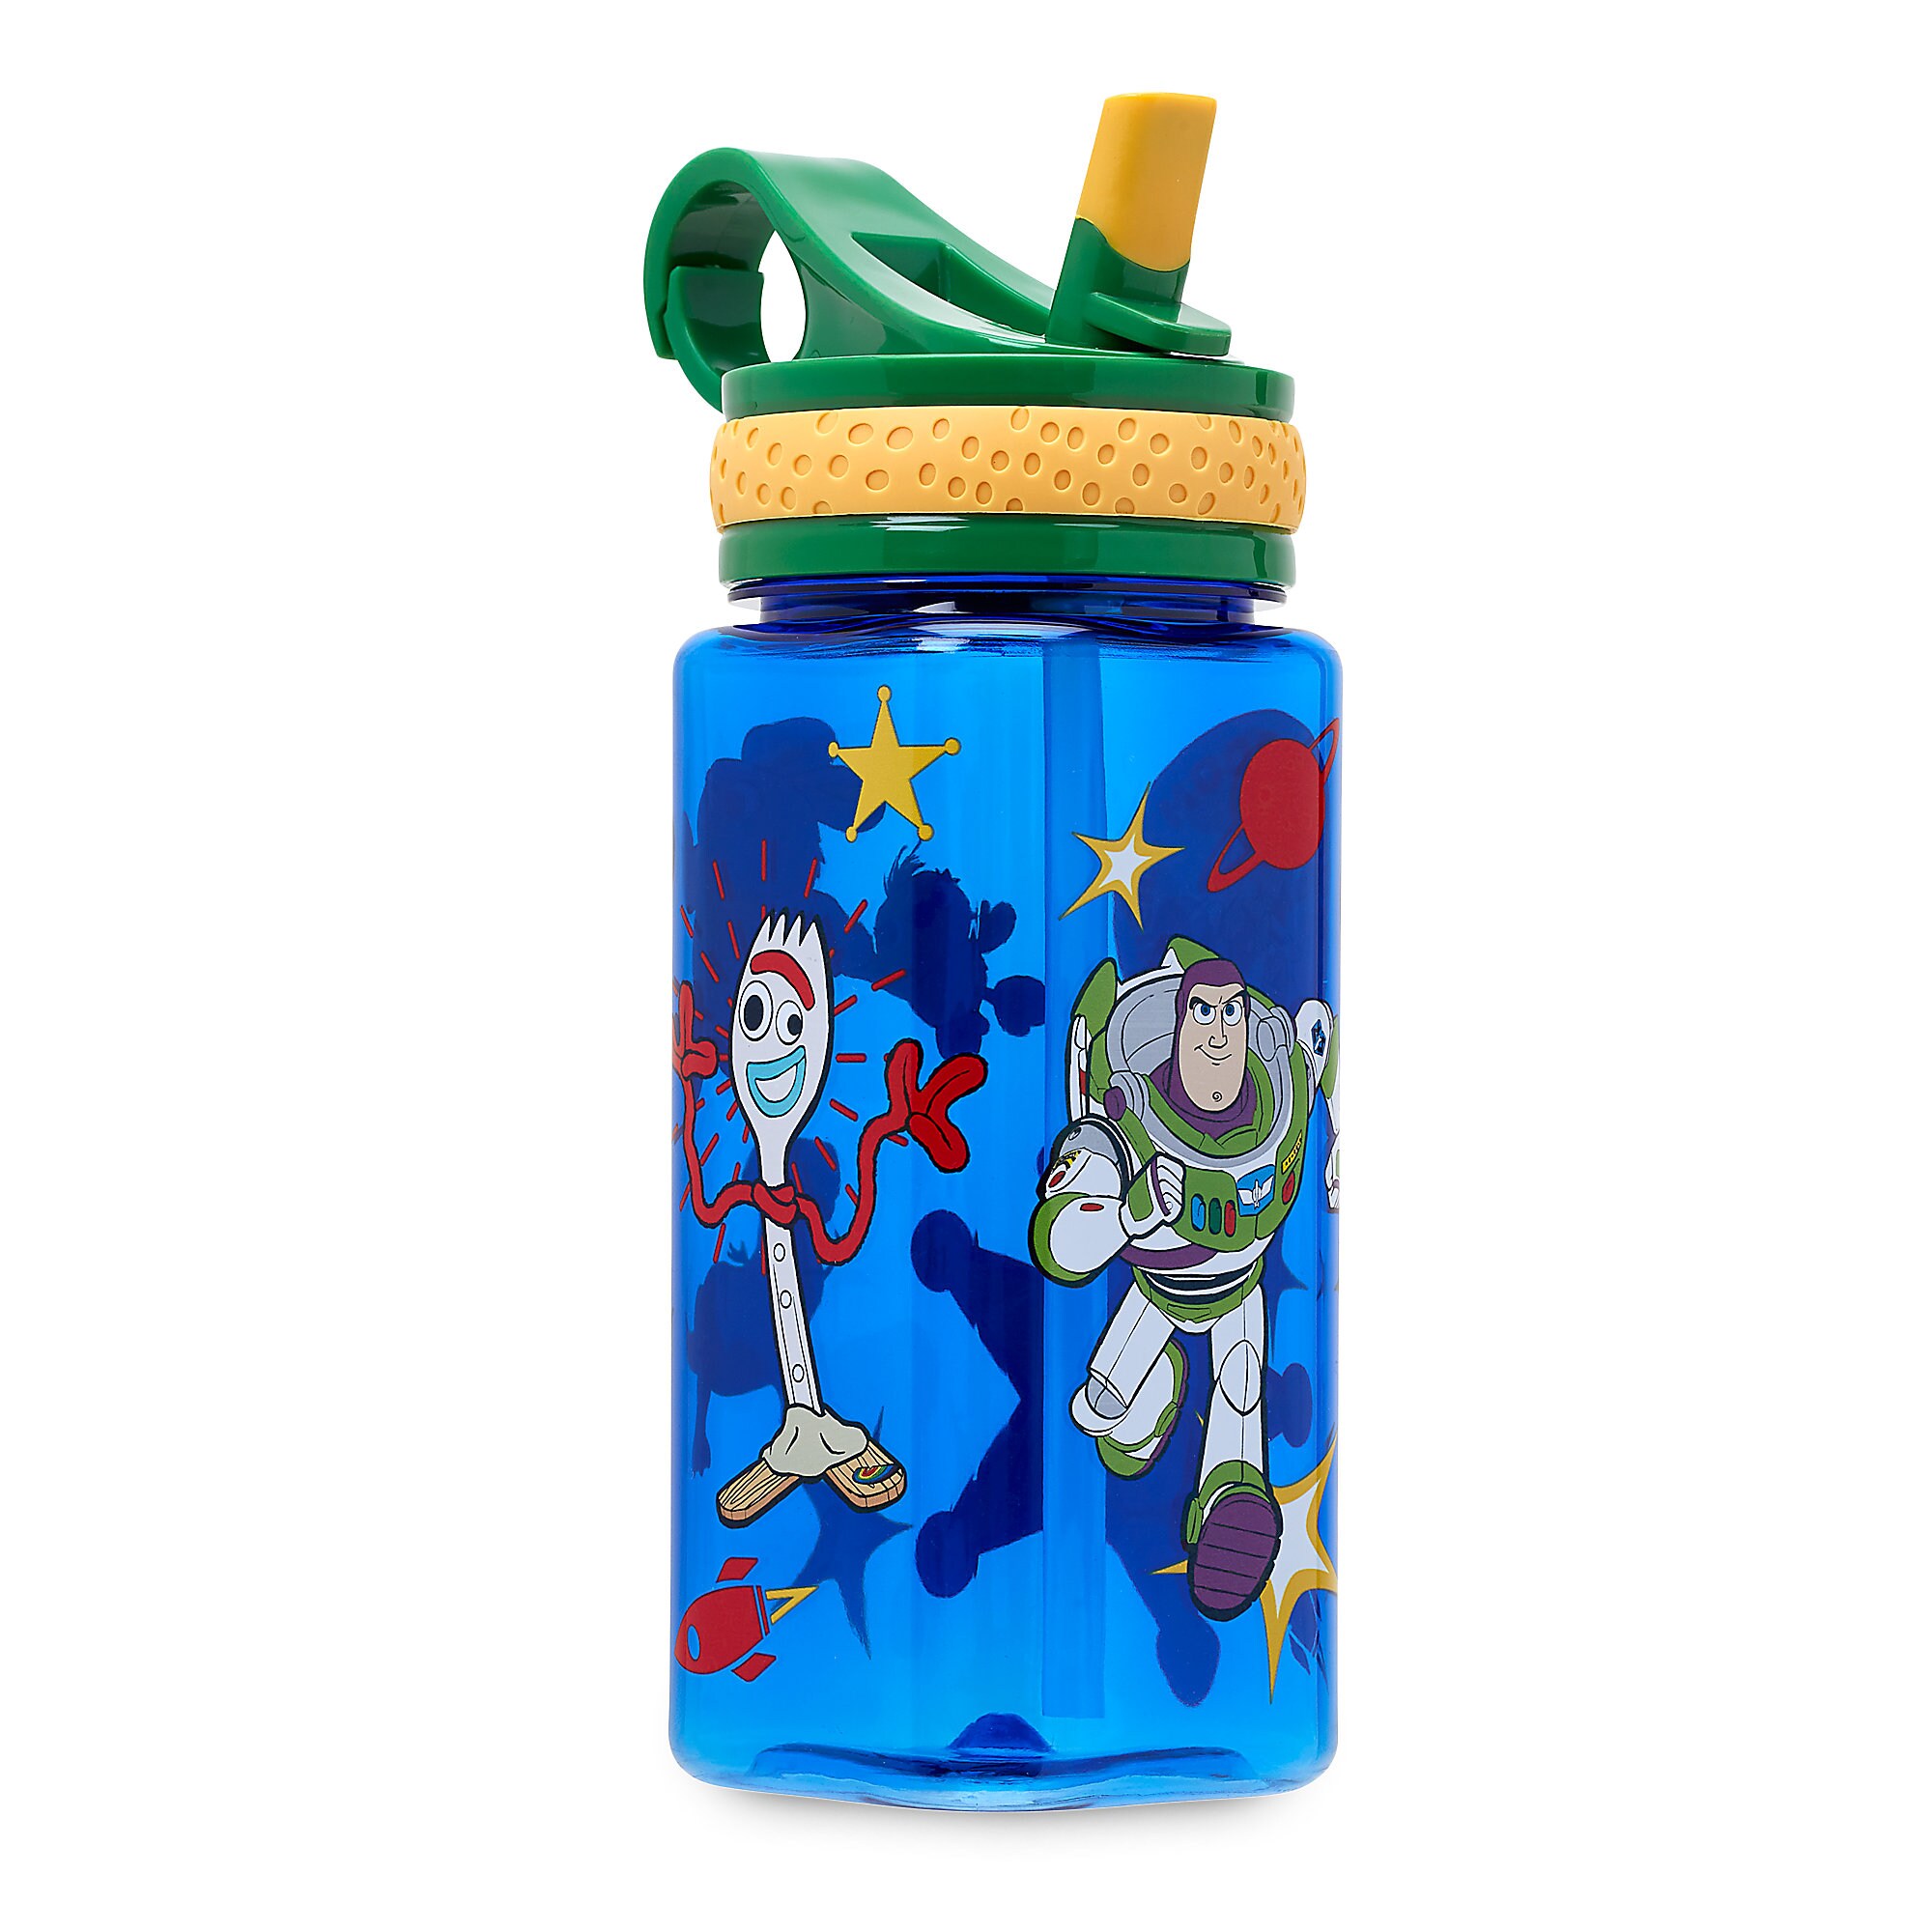 Toy Story 4 Water Bottle with Built-In Straw